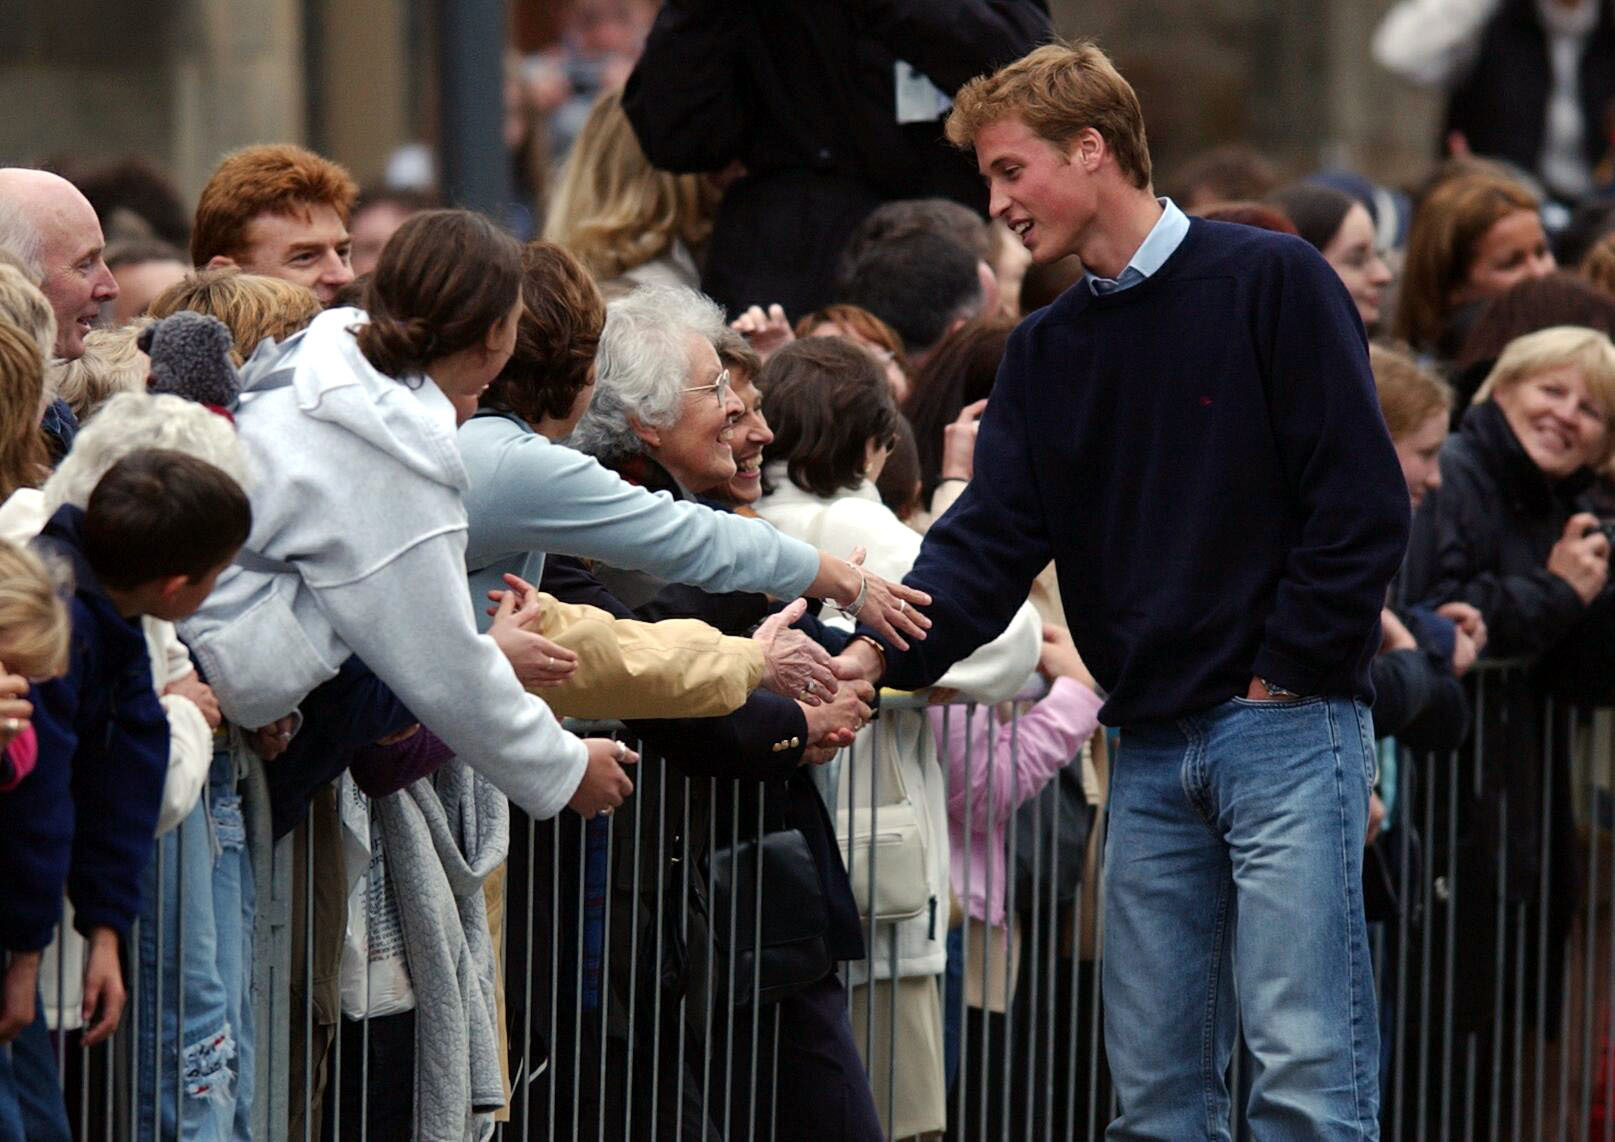 William shakes hands with a wellwisher as crowds gathered to witness his arrival at university in 2001 (PA)